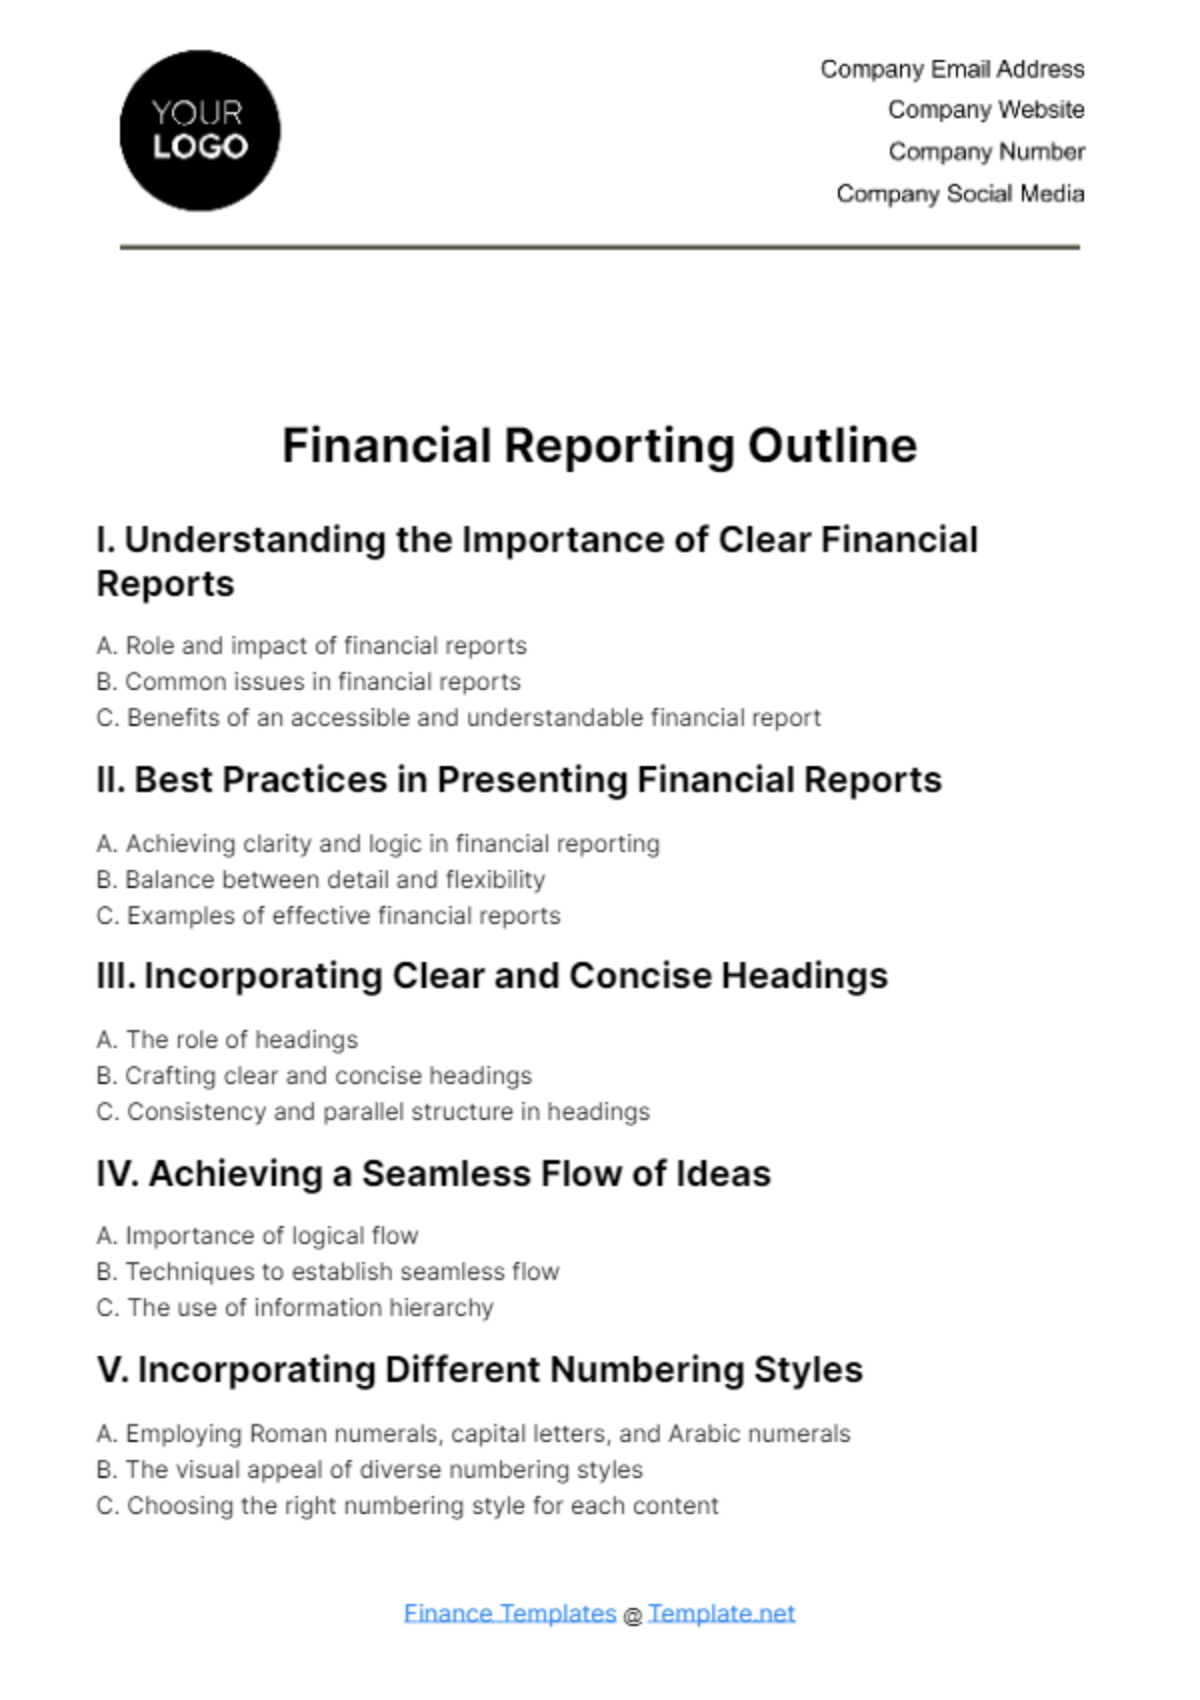 Financial Reporting Outline Template